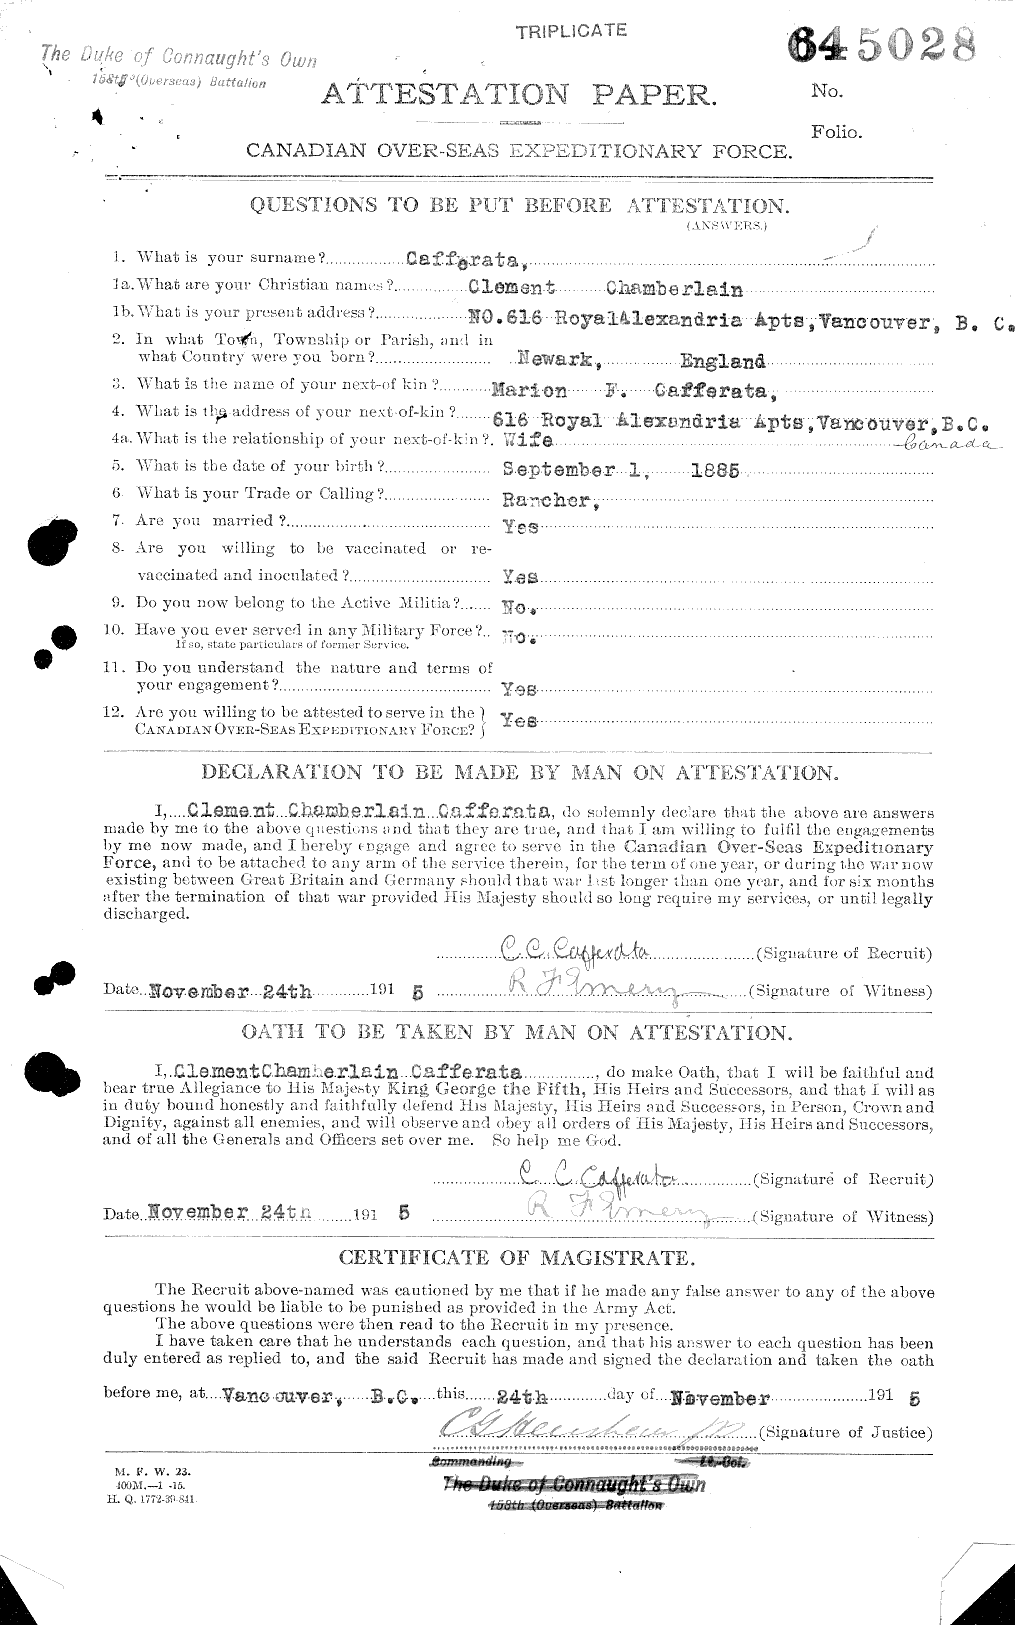 Personnel Records of the First World War - CEF 000194a